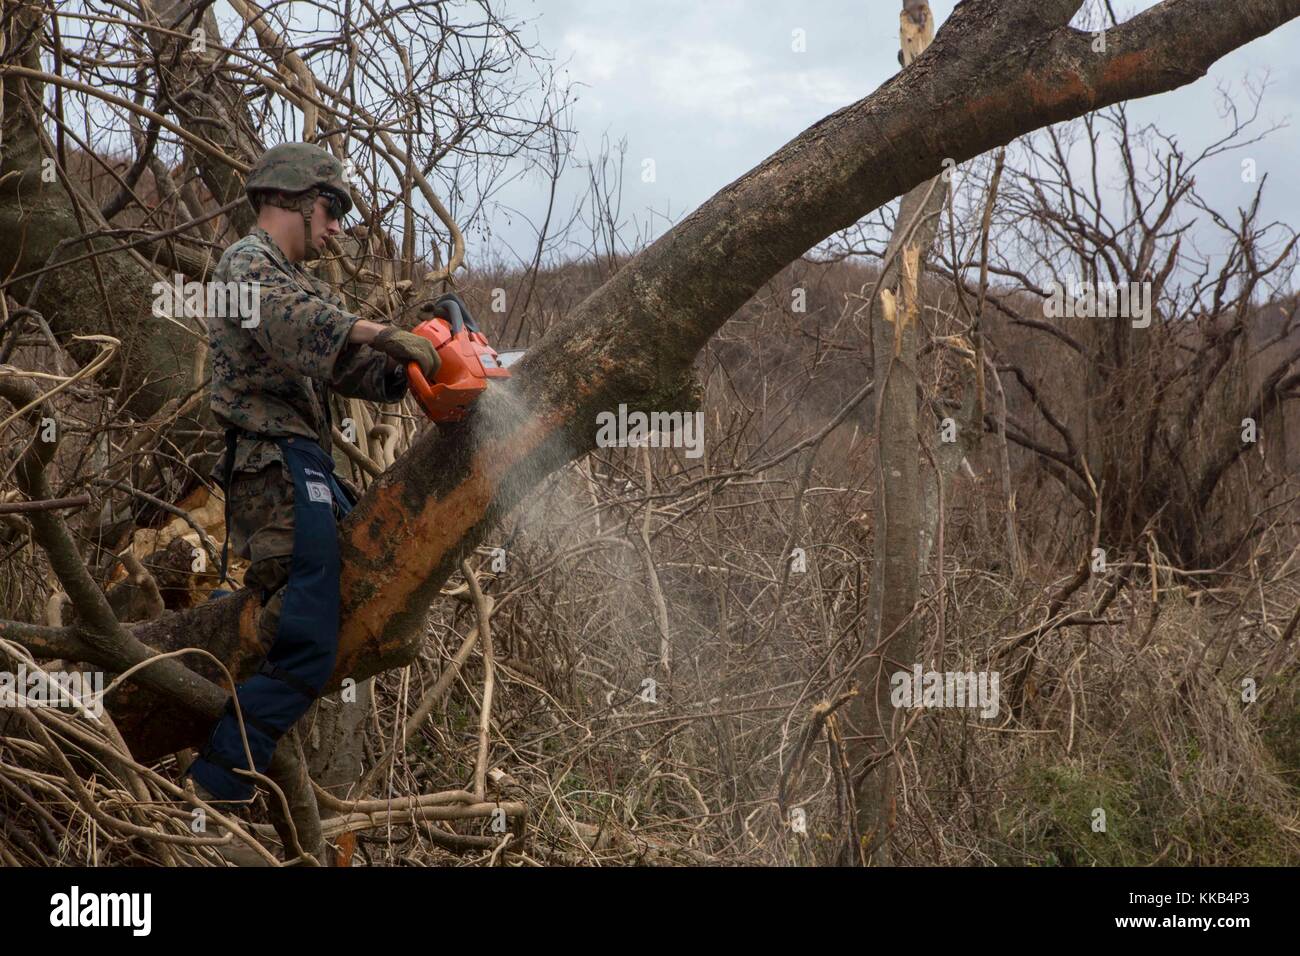 A U.S. Marine Corps soldier cuts down a tree blocking a road during relief efforts in the aftermath of Hurricane Maria September 25, 2017 in St. Croix, U.S. Virgin Islands.  (photo by Santino D. Martinez via Planetpix) Stock Photo